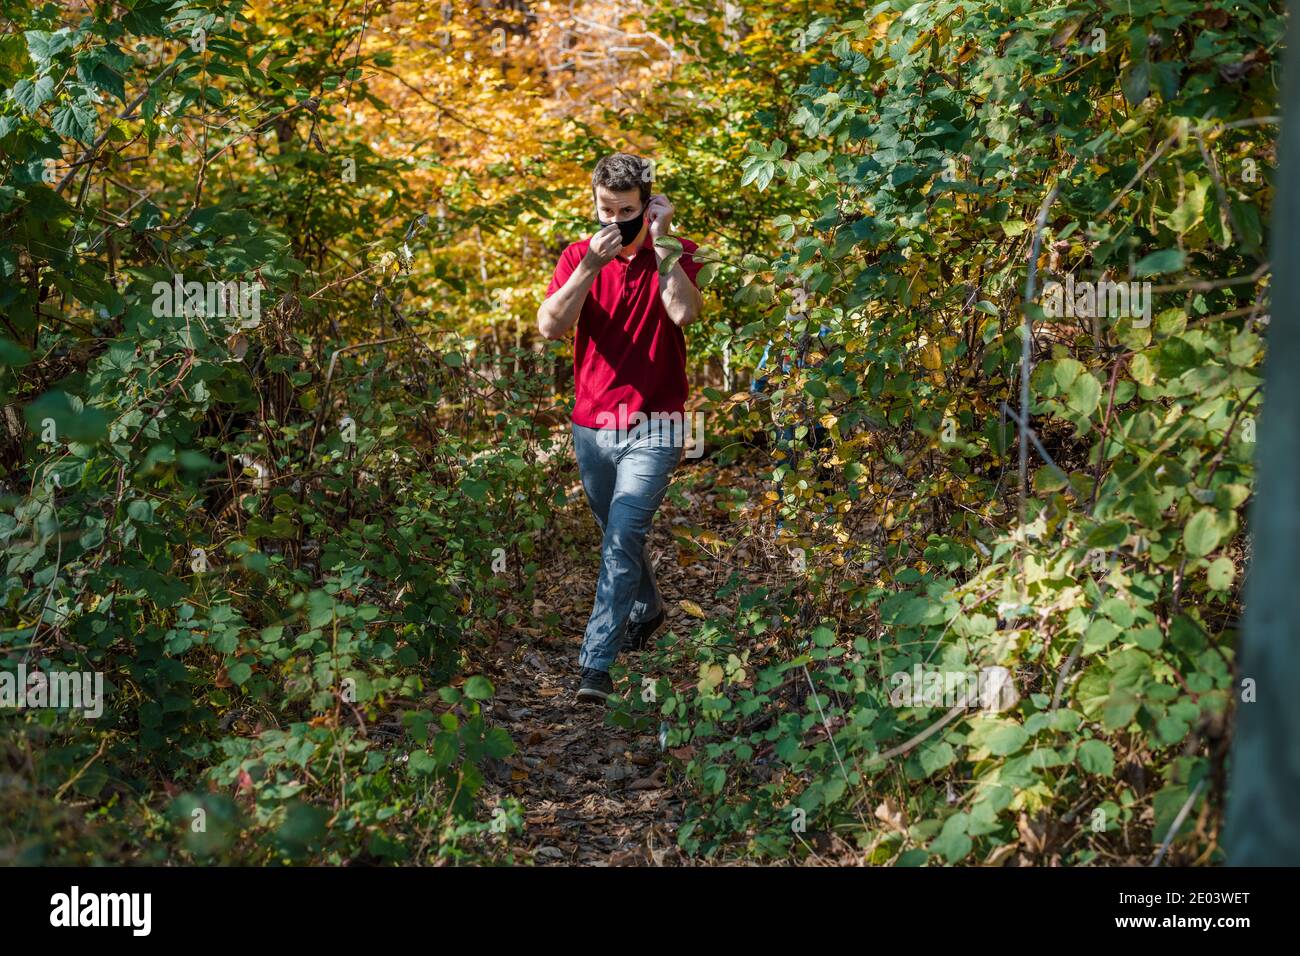 Middle age man adjusting face mask walking in woods Stock Photo